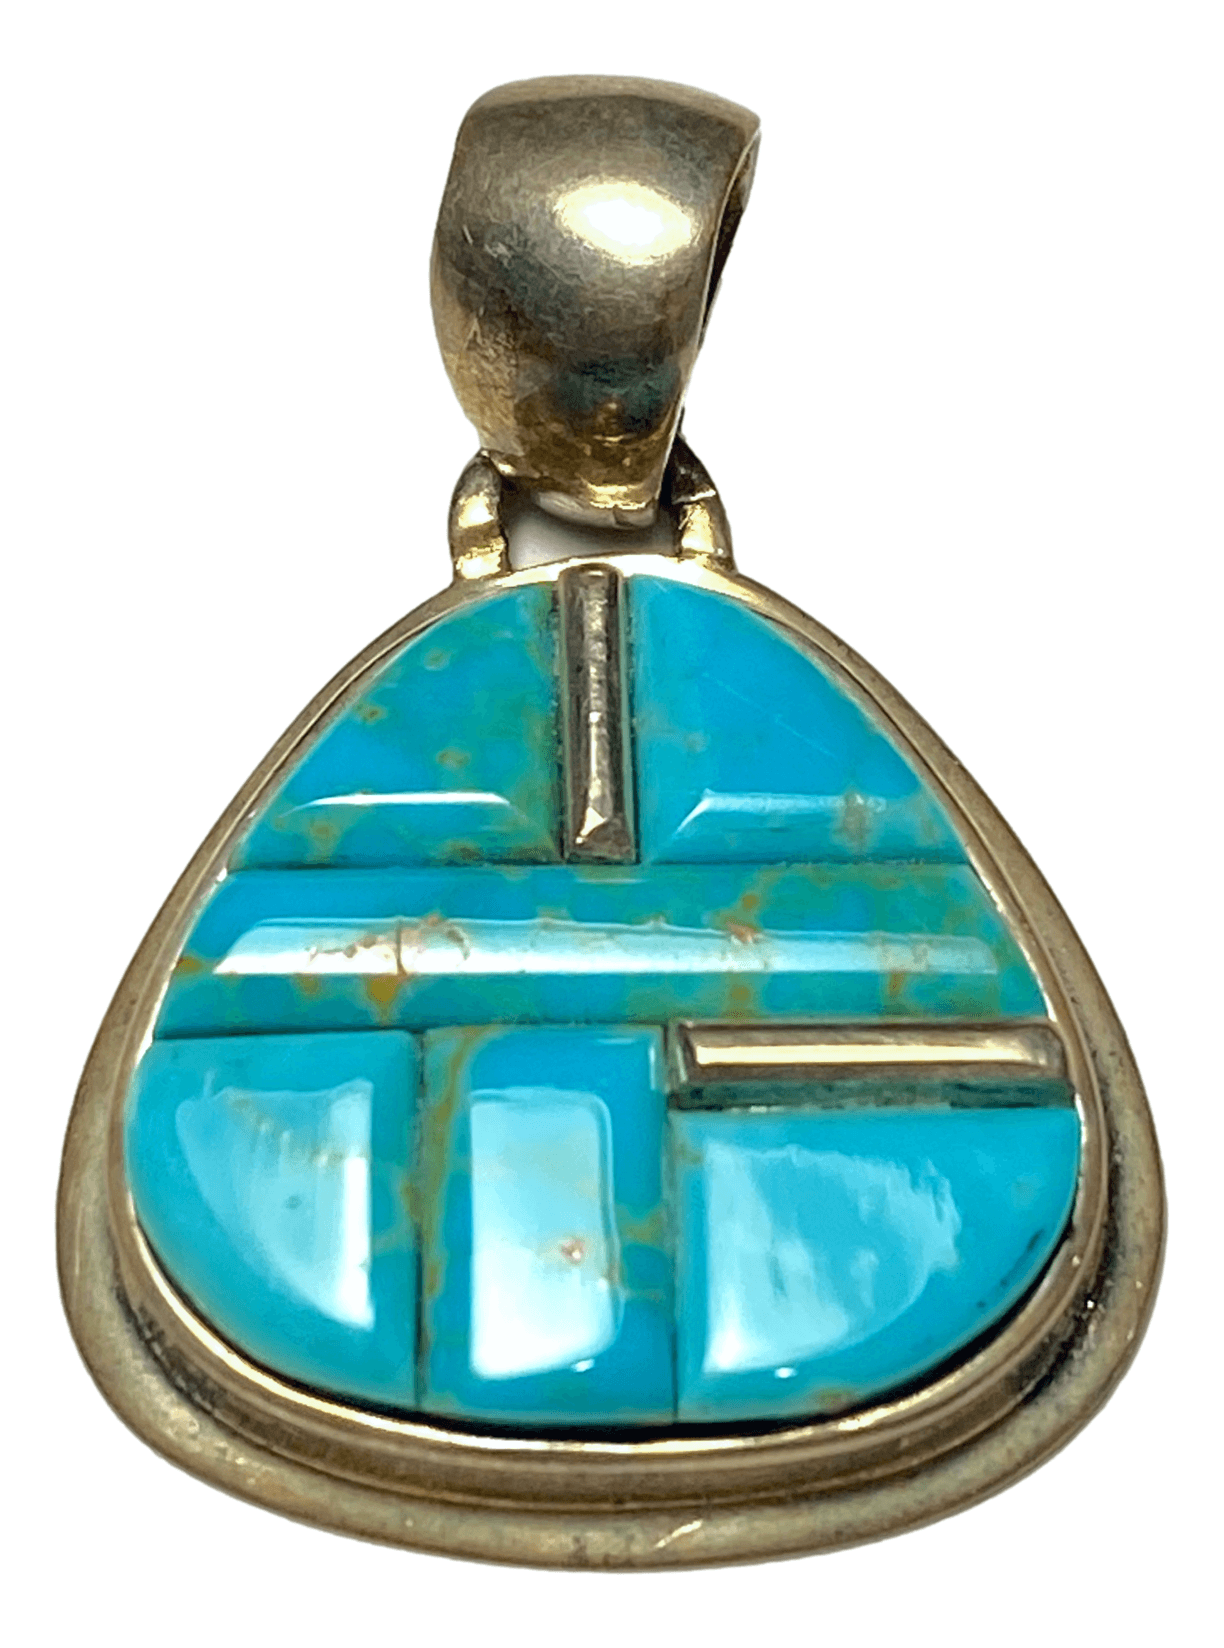 Pendant Sterling Silver Triangle Turquoise Inlay Soft Edges Handcrafted by New Mexico Artisan 1 3/8 L x 1 W inches - Ysleta Mission Gift Shop- VOTED El Paso's Best Gift Shop